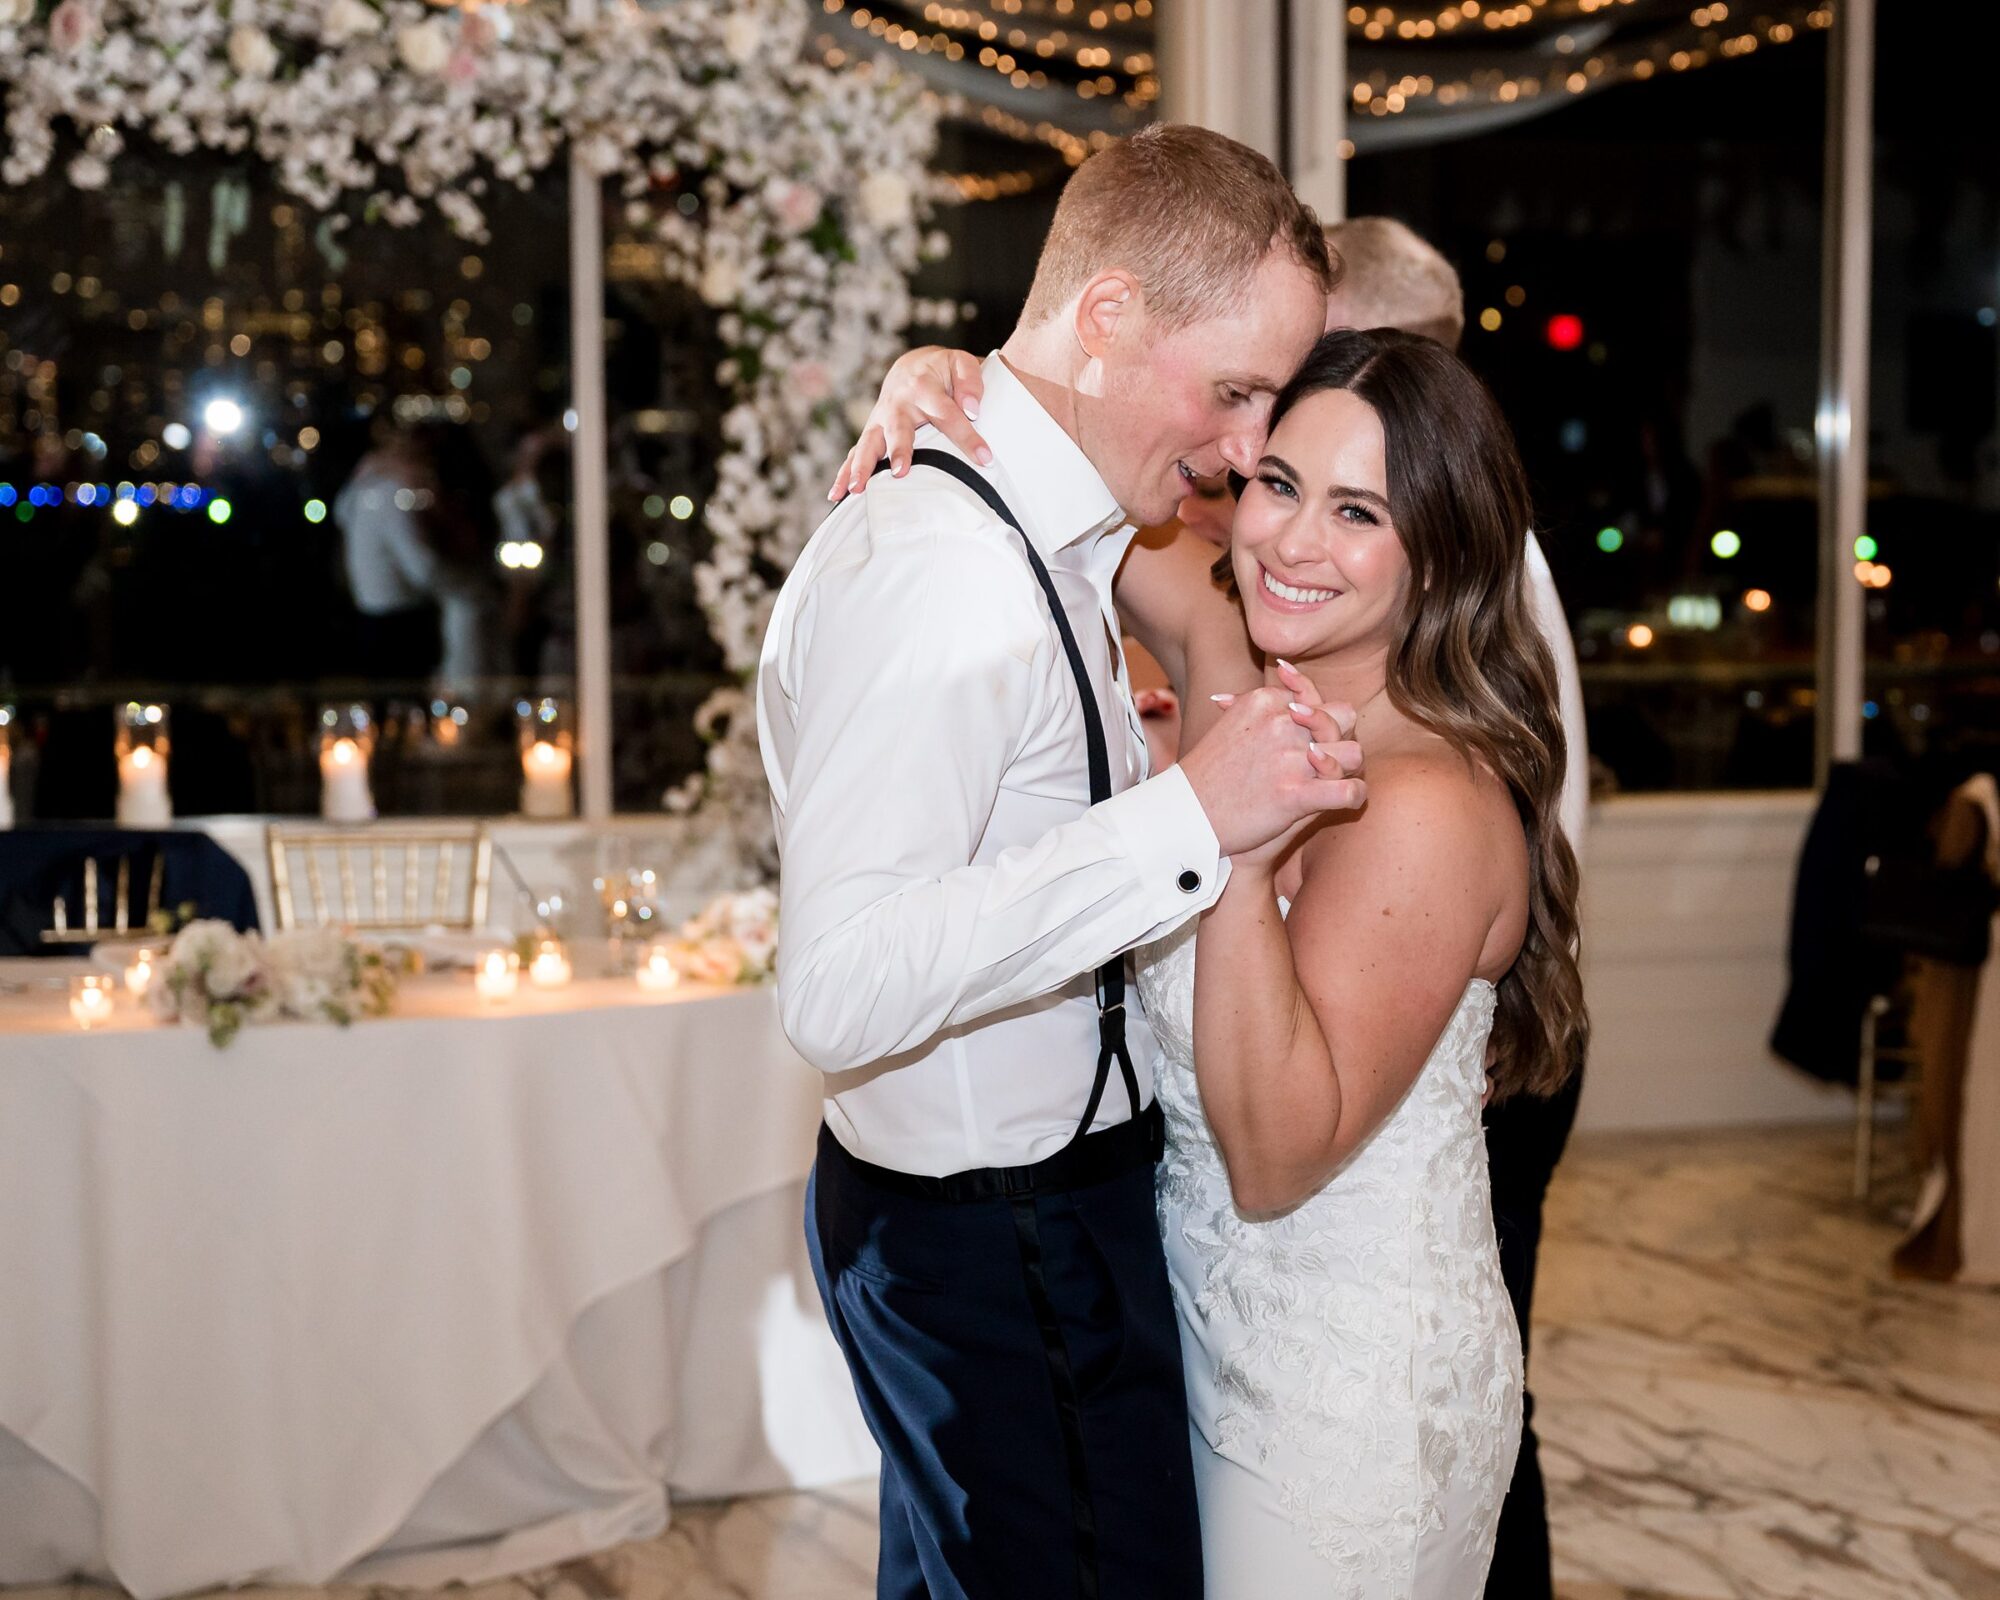 A bride and groom sharing their first dance at their wedding reception.